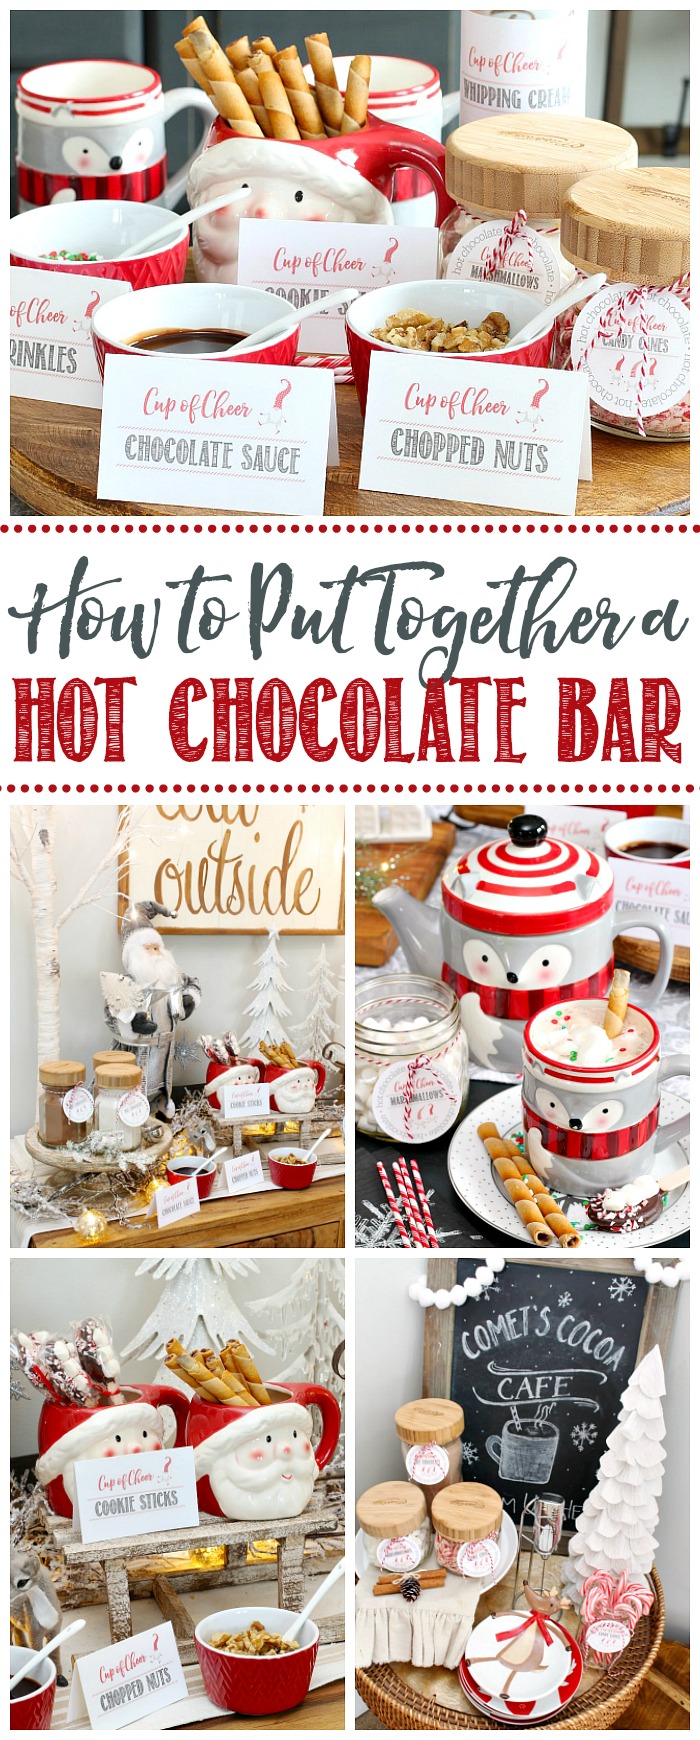 https://www.cleanandscentsible.com/wp-content/uploads/2018/12/How-to-put-together-a-hot-chocolate-bar-title.jpg